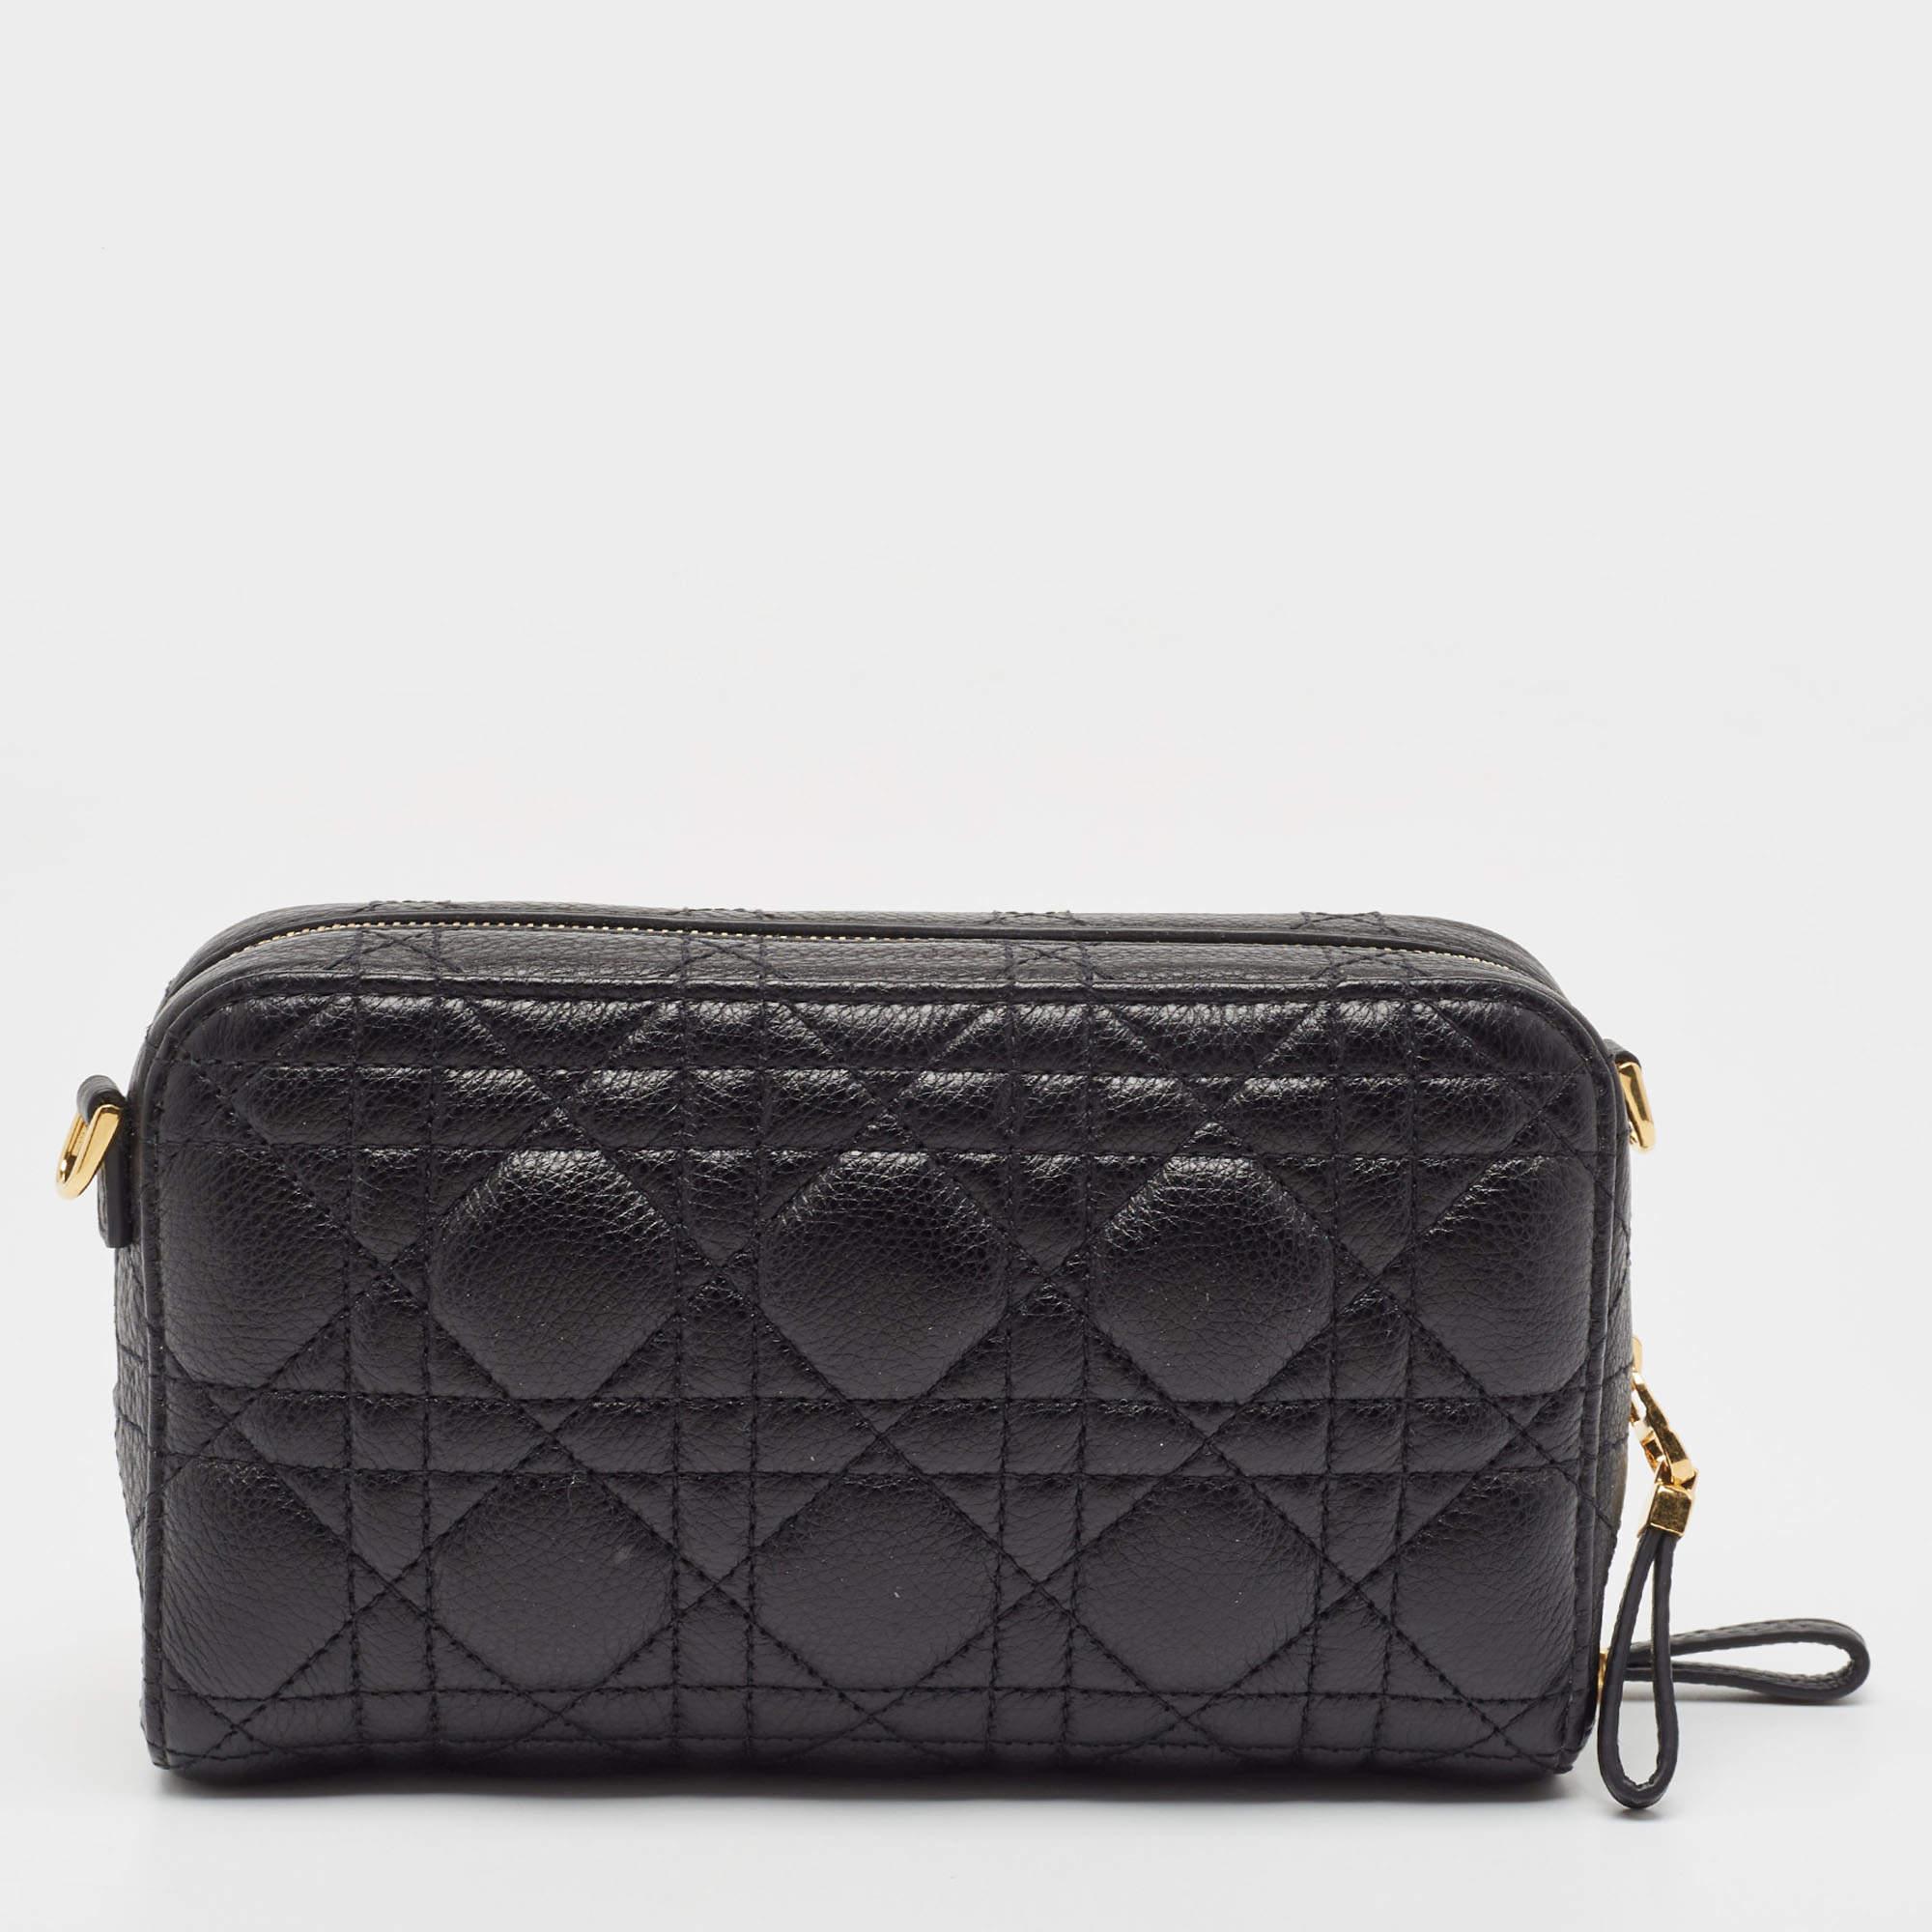 Perfect for conveniently housing your essentials in one place, this Dior double pouch bag is a worthy investment. It has notable details and offers a look of luxury.

Includes: Original Dustbag, Info Card, Detachable Strap